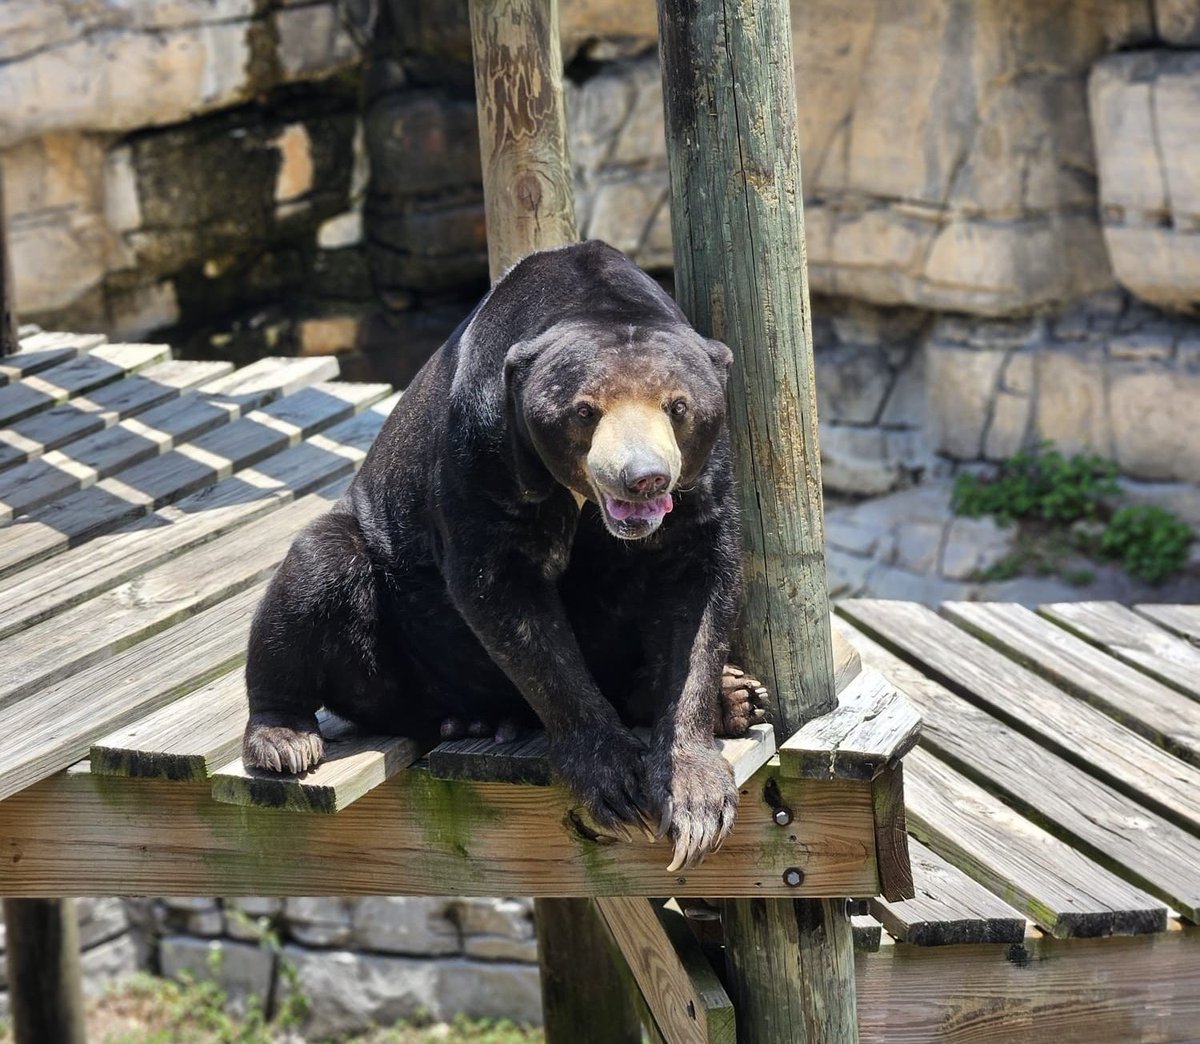 Wrapping up Bear Awareness Week with Kacey, the Sun Bear! 

Sun bears are the smallest species of bear typically weighing anywhere between 60-150lbs. Kacey, however, is large for a sun bear and weighs around 220lbs!